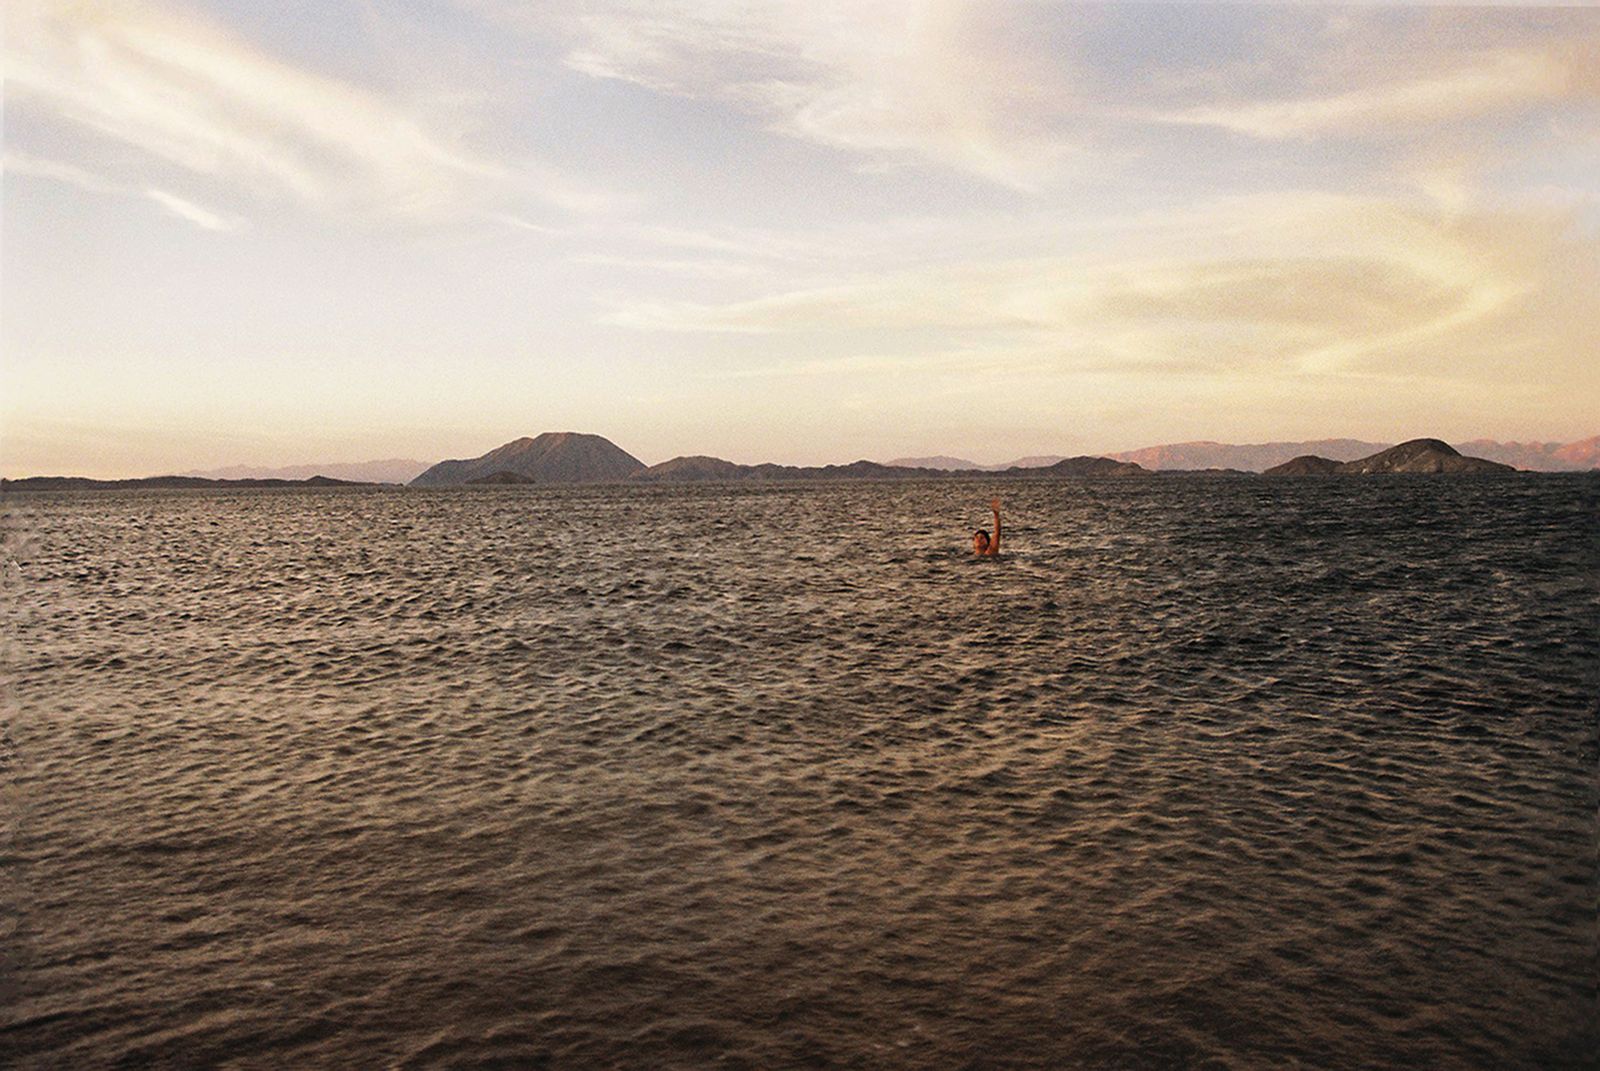 © Angélica Escoto - Image from the Desert sea photography project